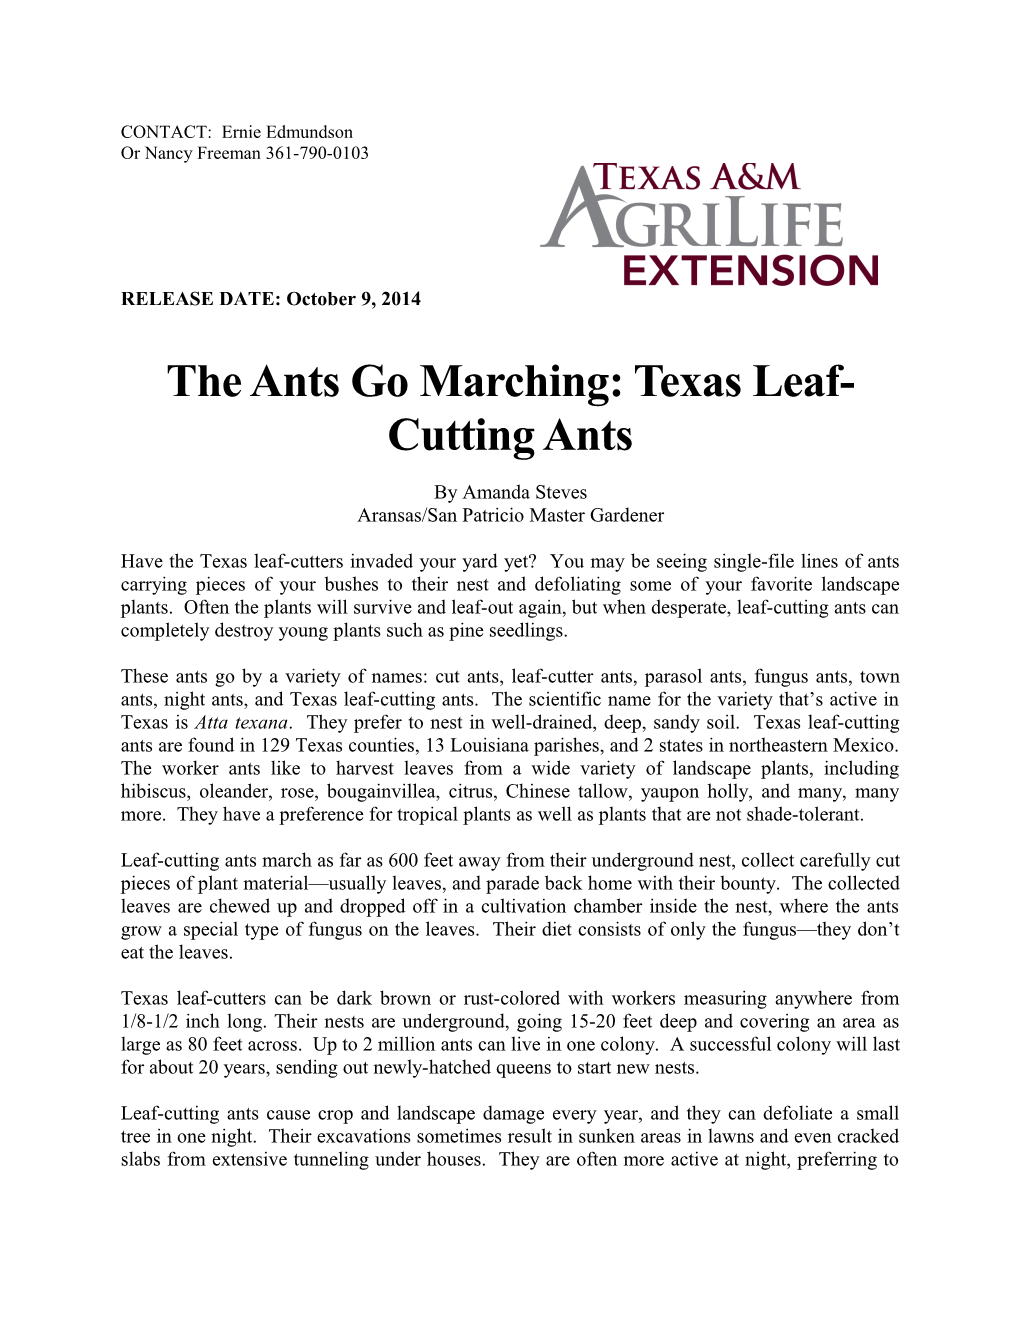 The Ants Go Marching: Texas Leaf-Cutting Ants